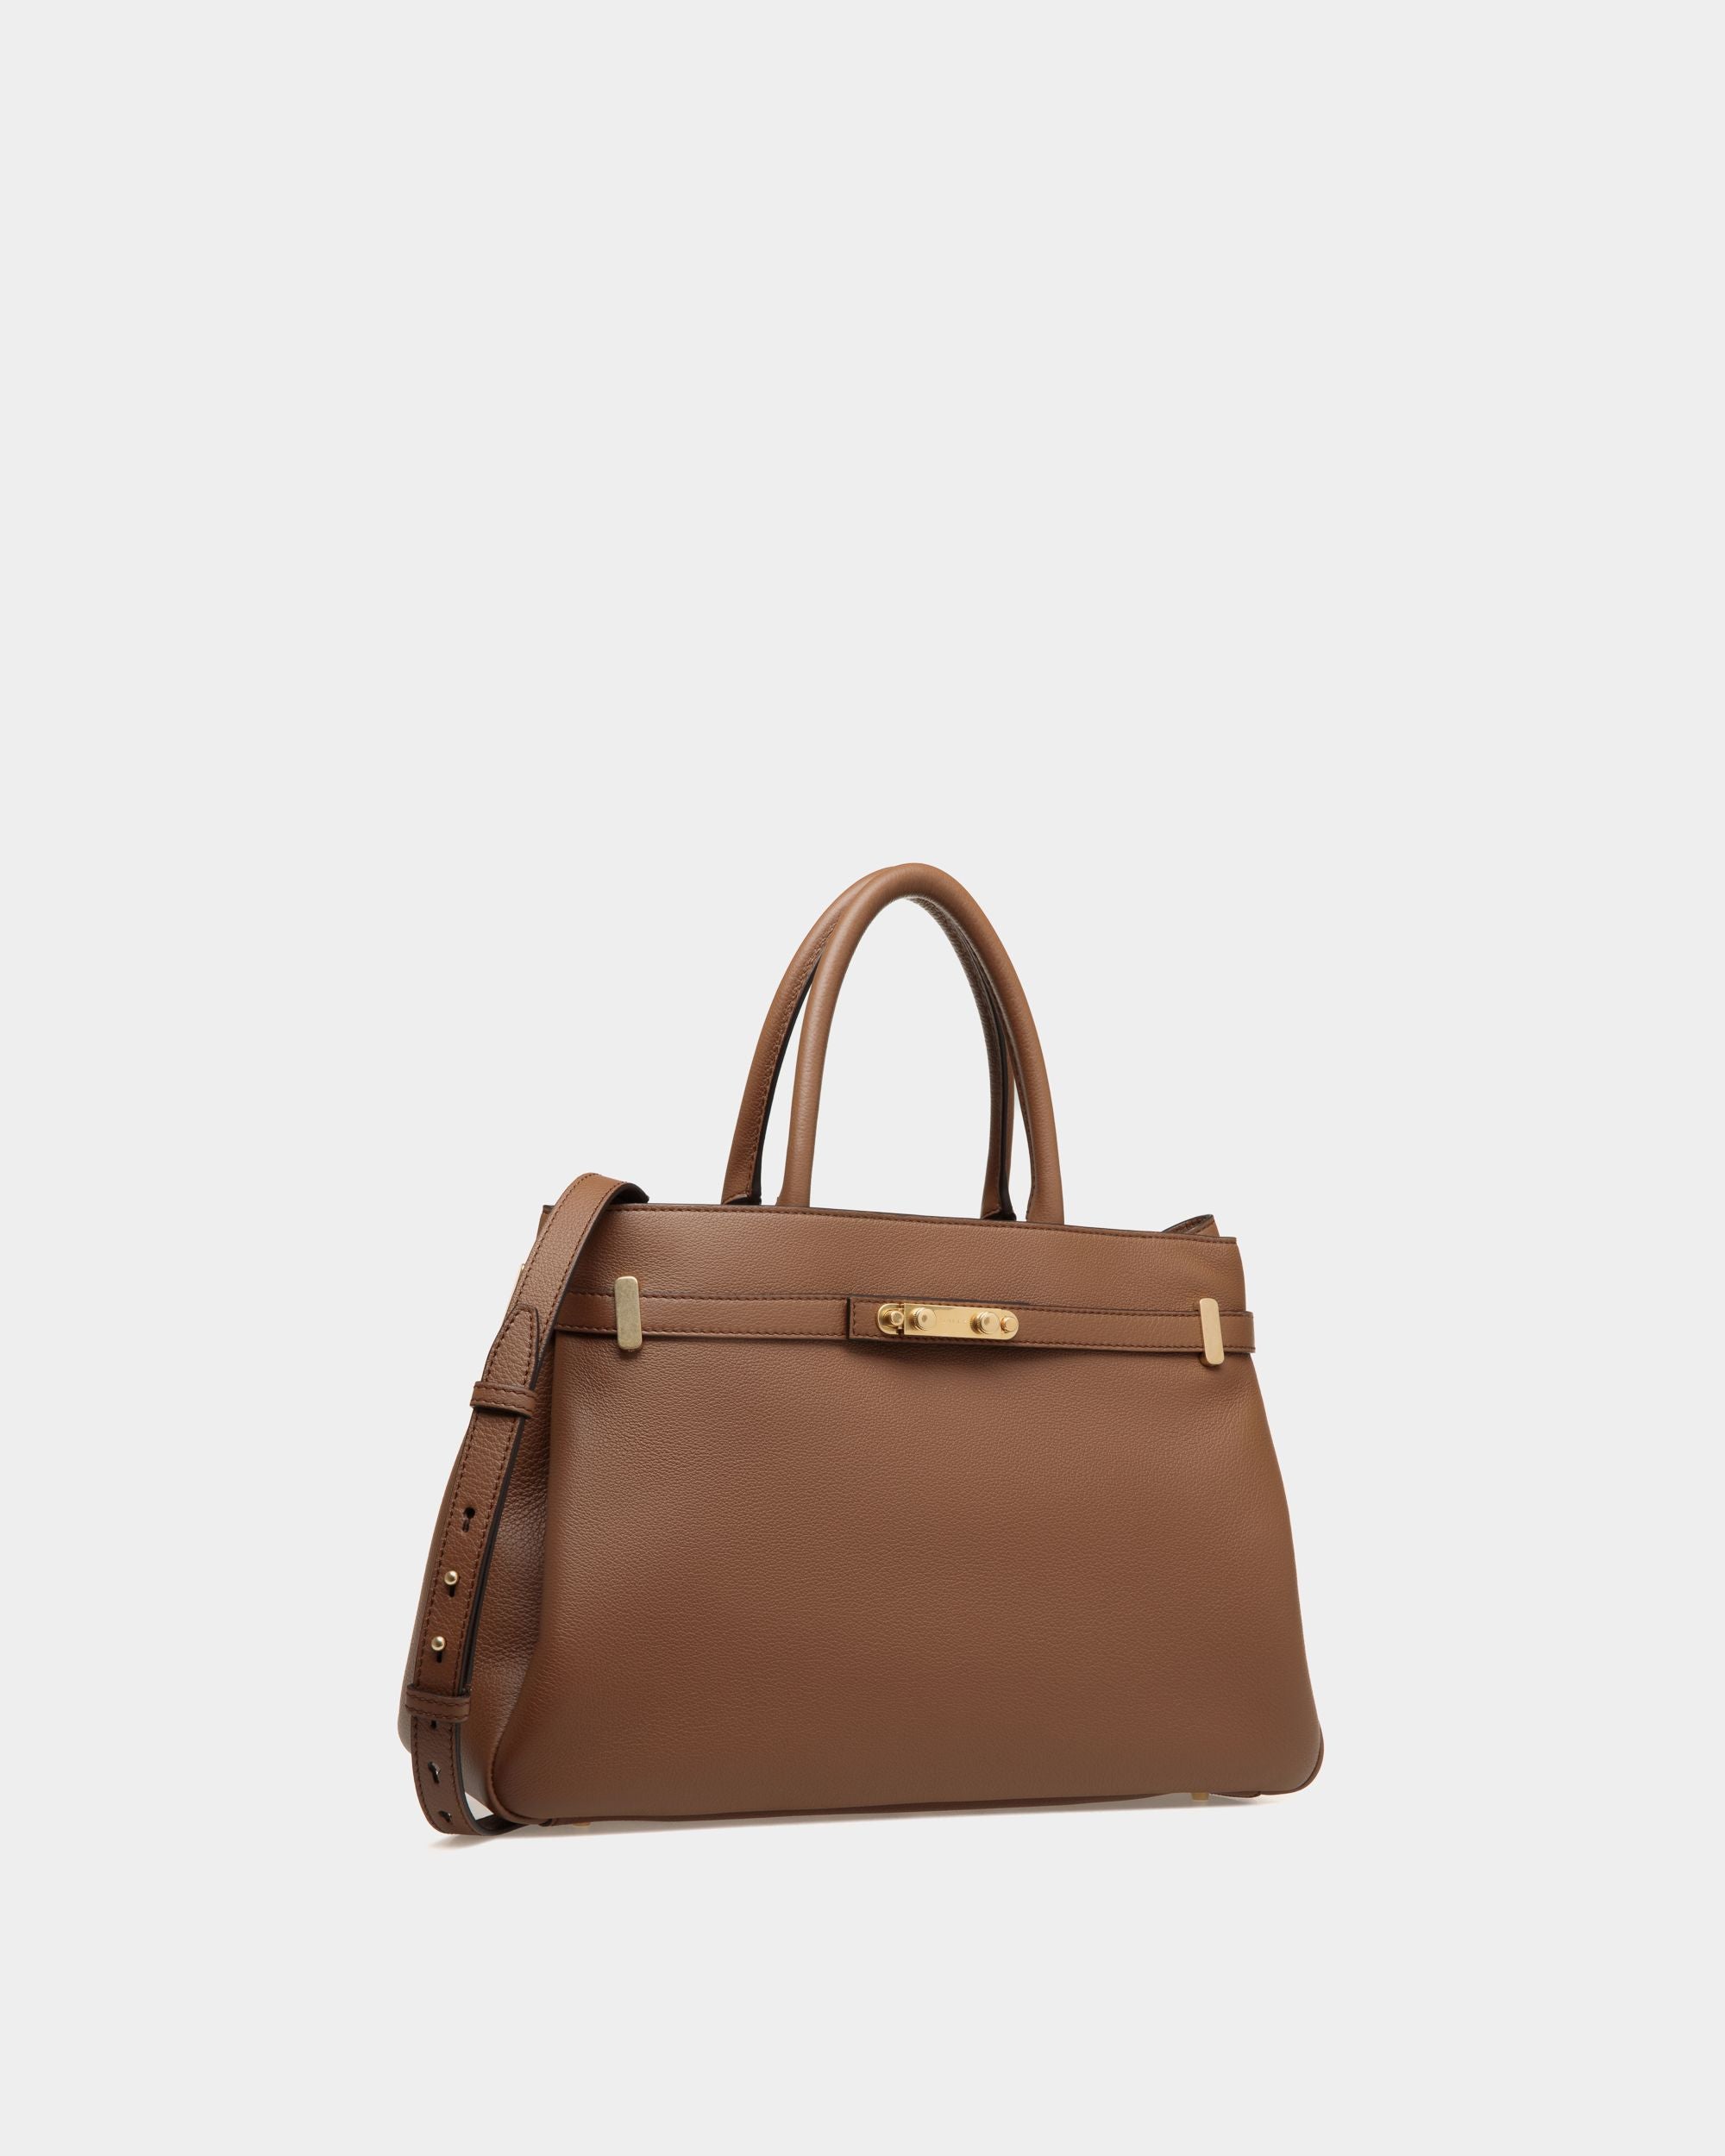 Carriage | Women's Tote Bag in Brown Leather | Bally | Still Life 3/4 Front